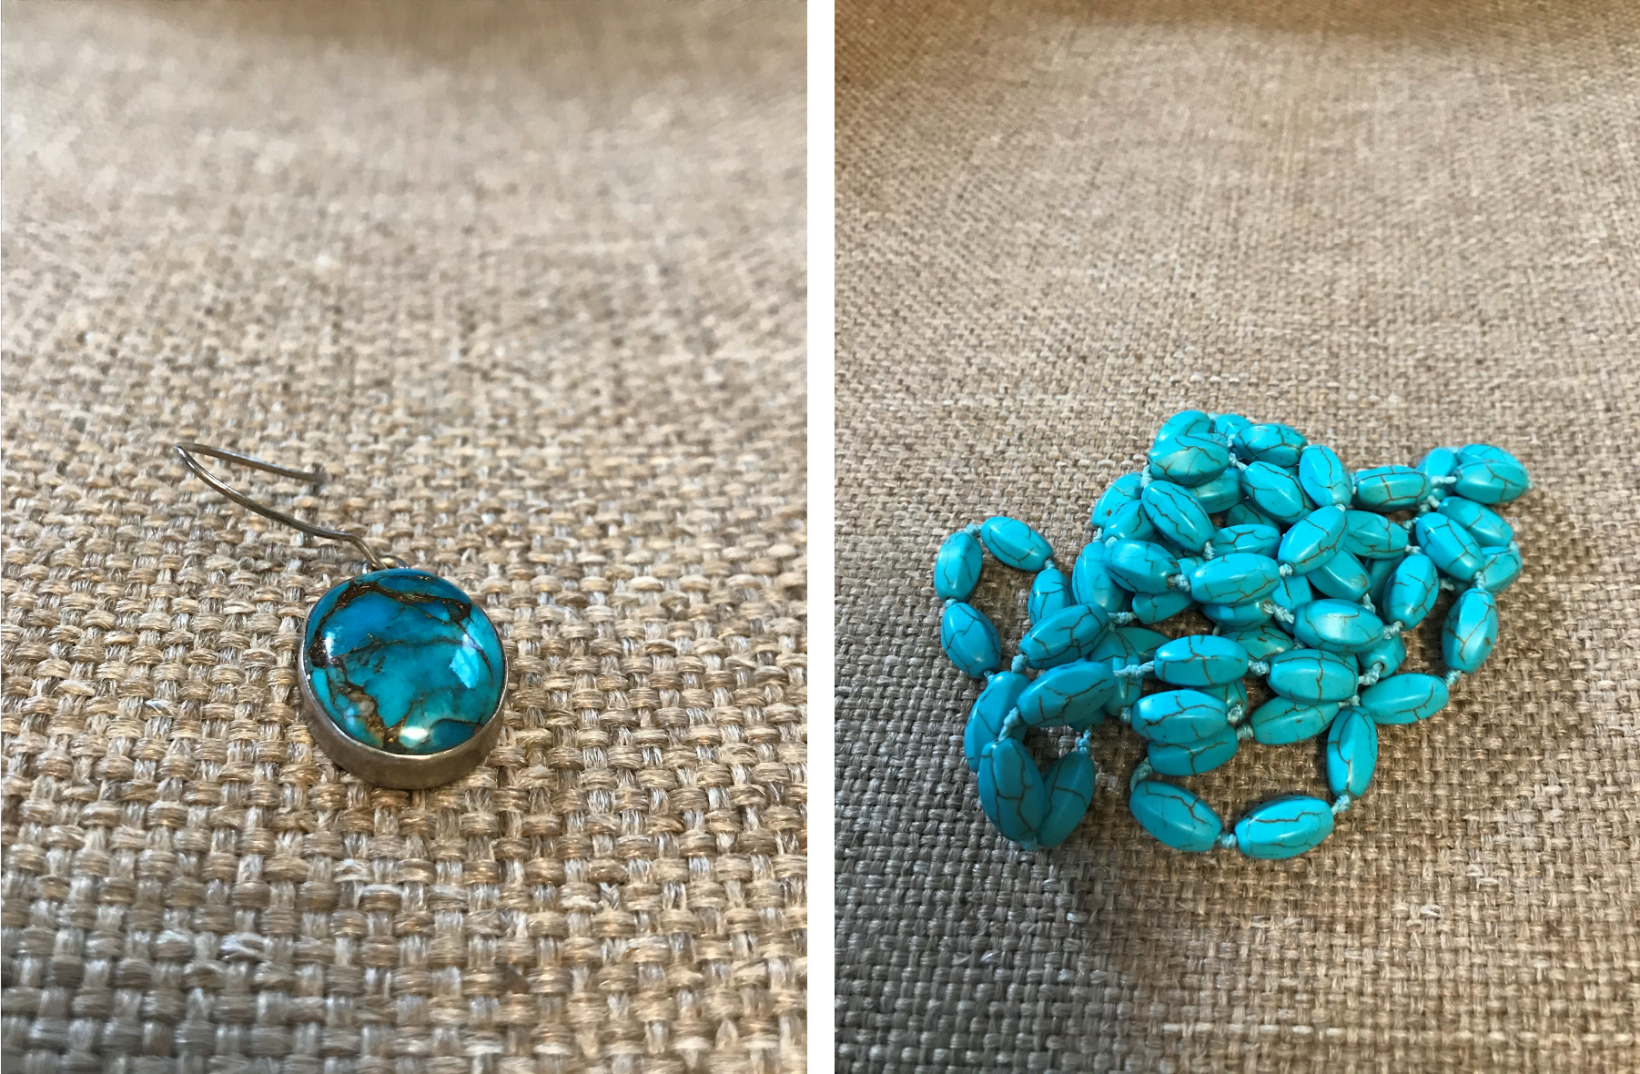 Identifying real turquoise with XRF testing